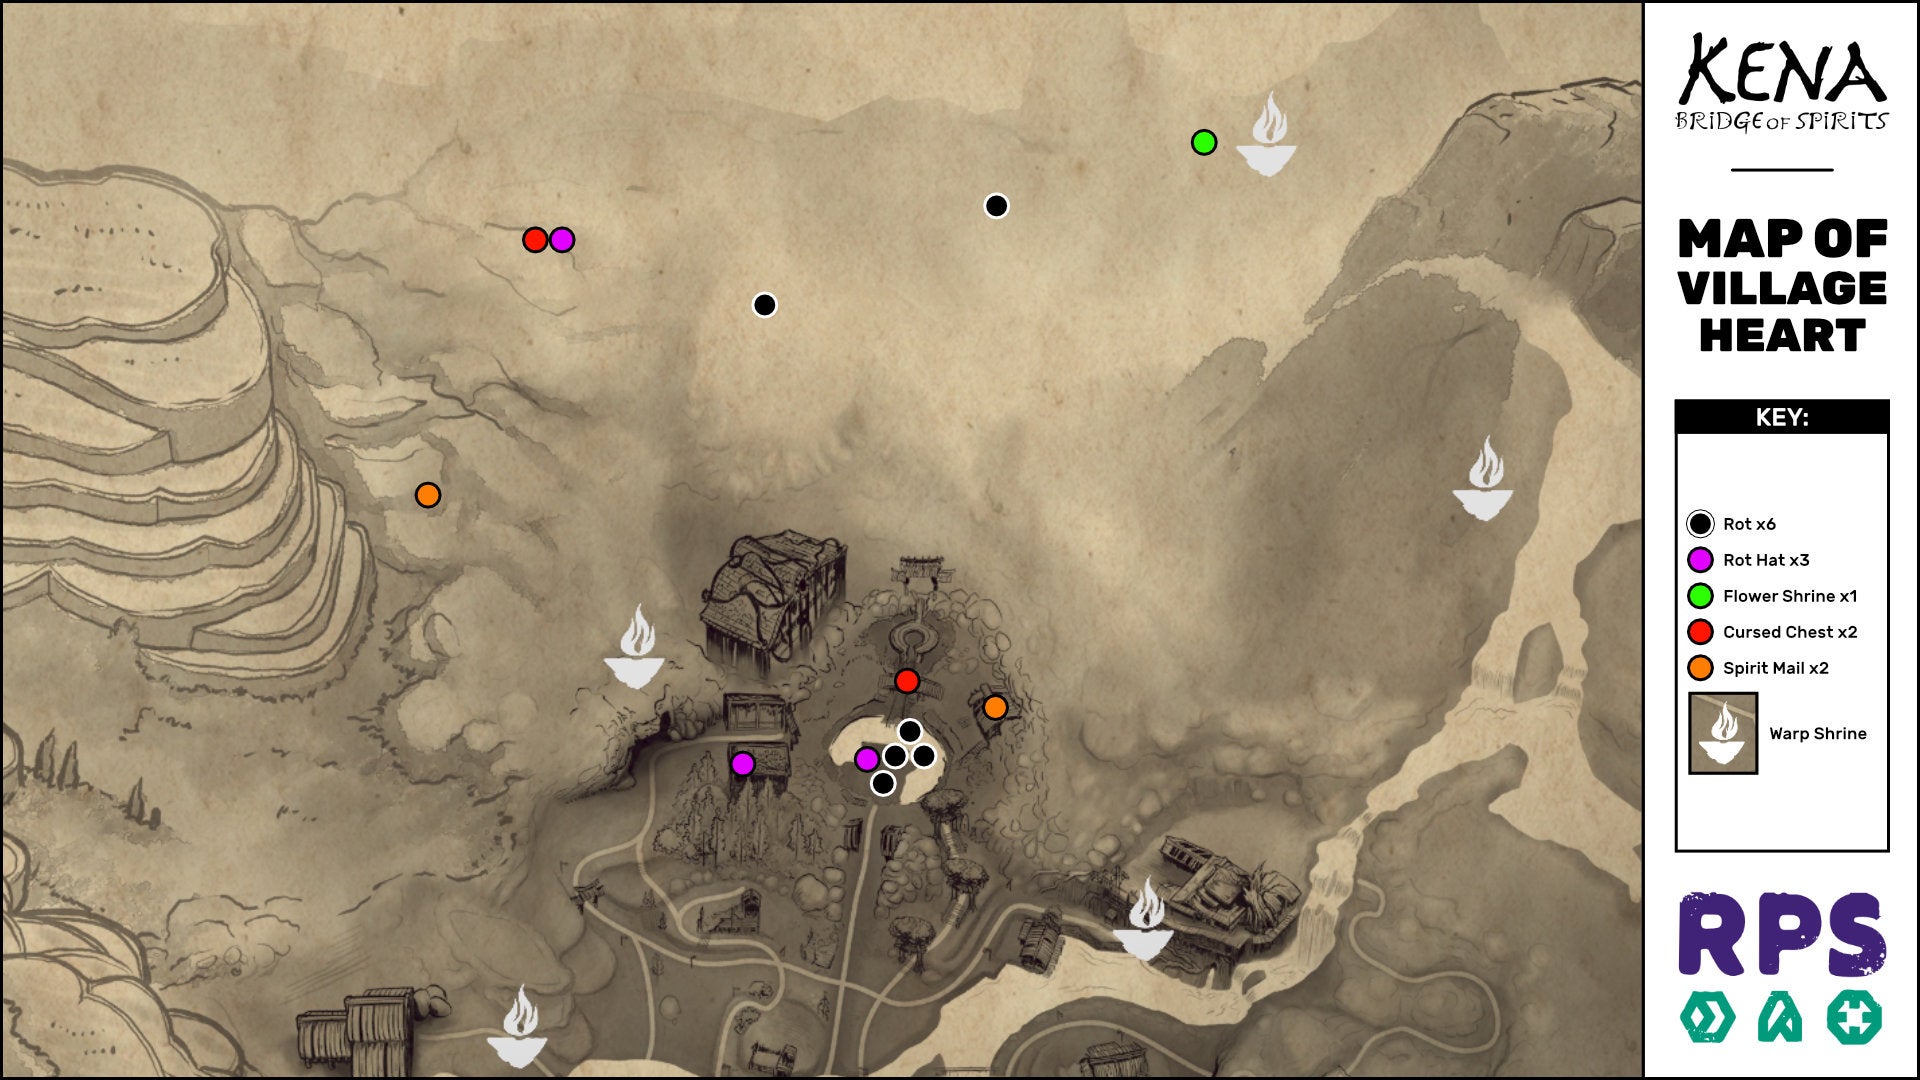 A map of the Village Heart area of Kena: Bridge Of Spirits with all collectible locations marked.